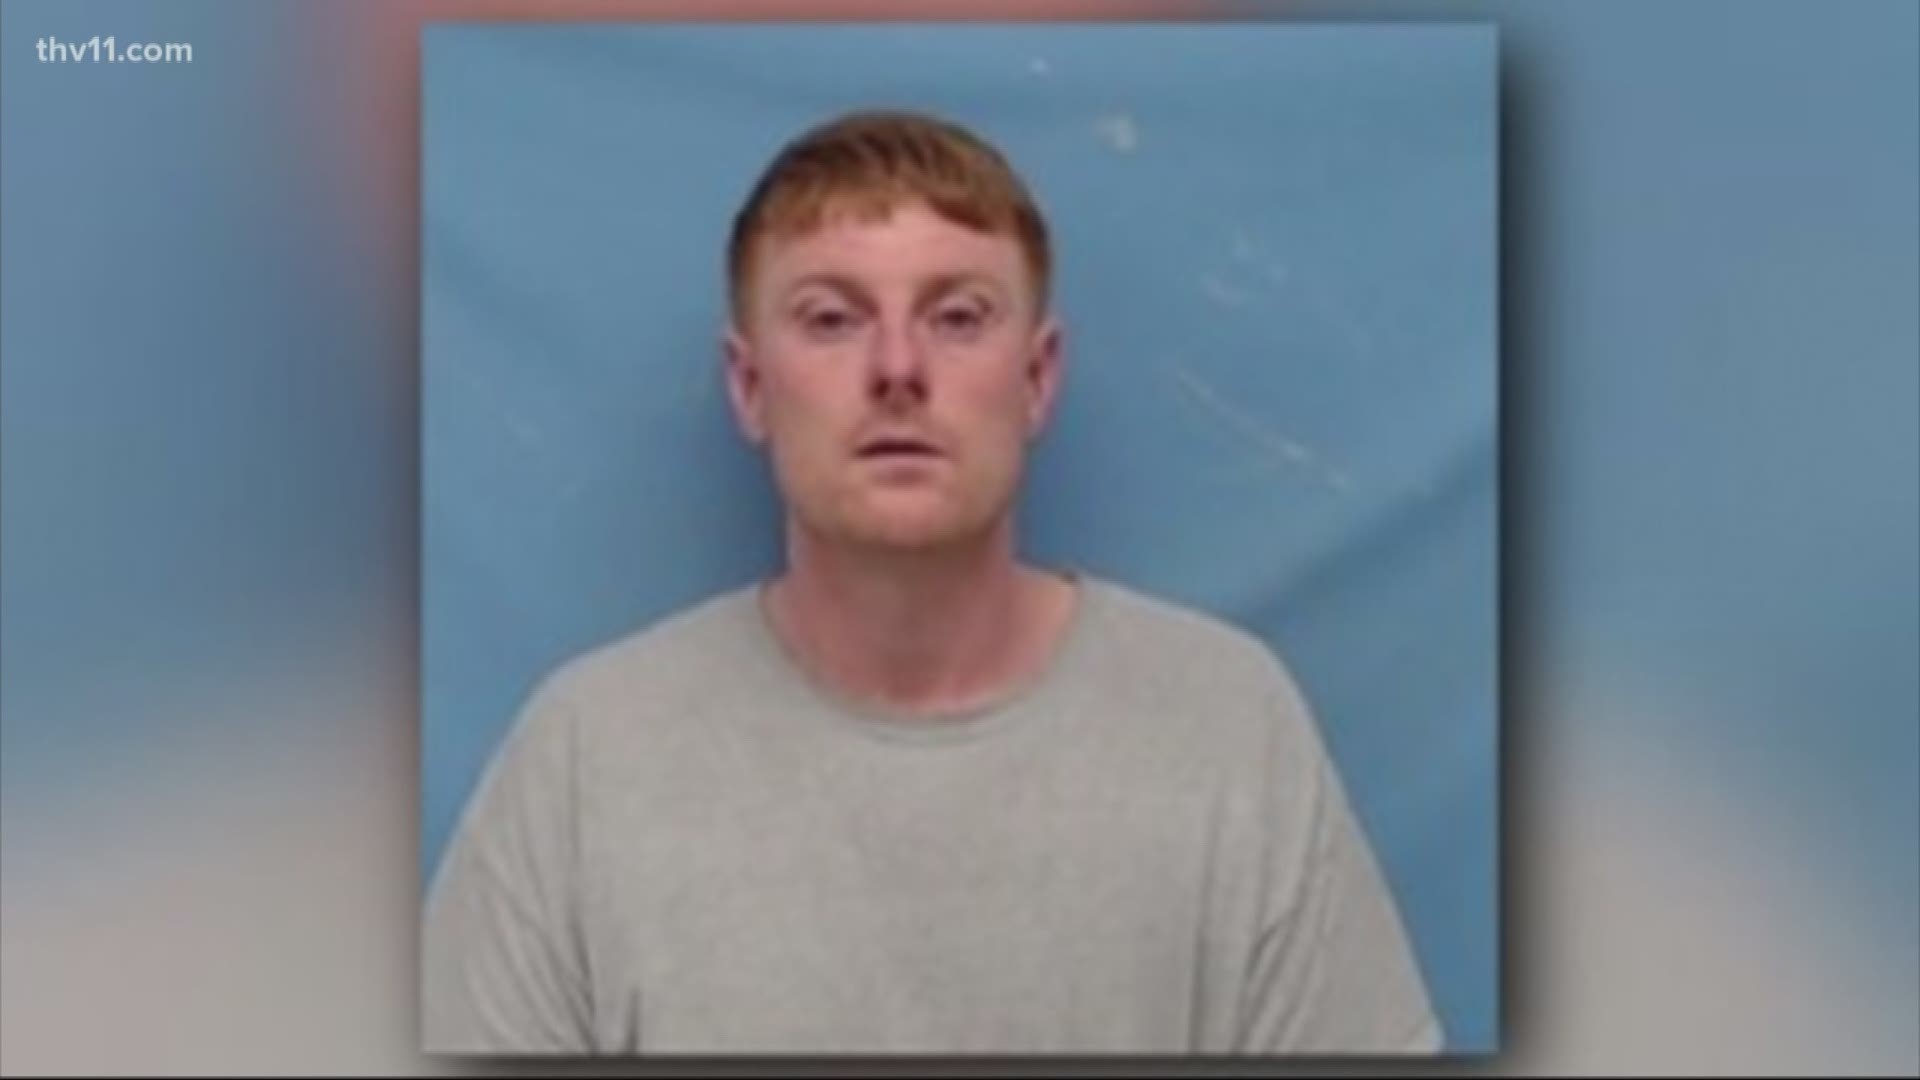 A Russellville man pleads "not guilty" to kidnapping, attempted kidnapping and indecent exposure.